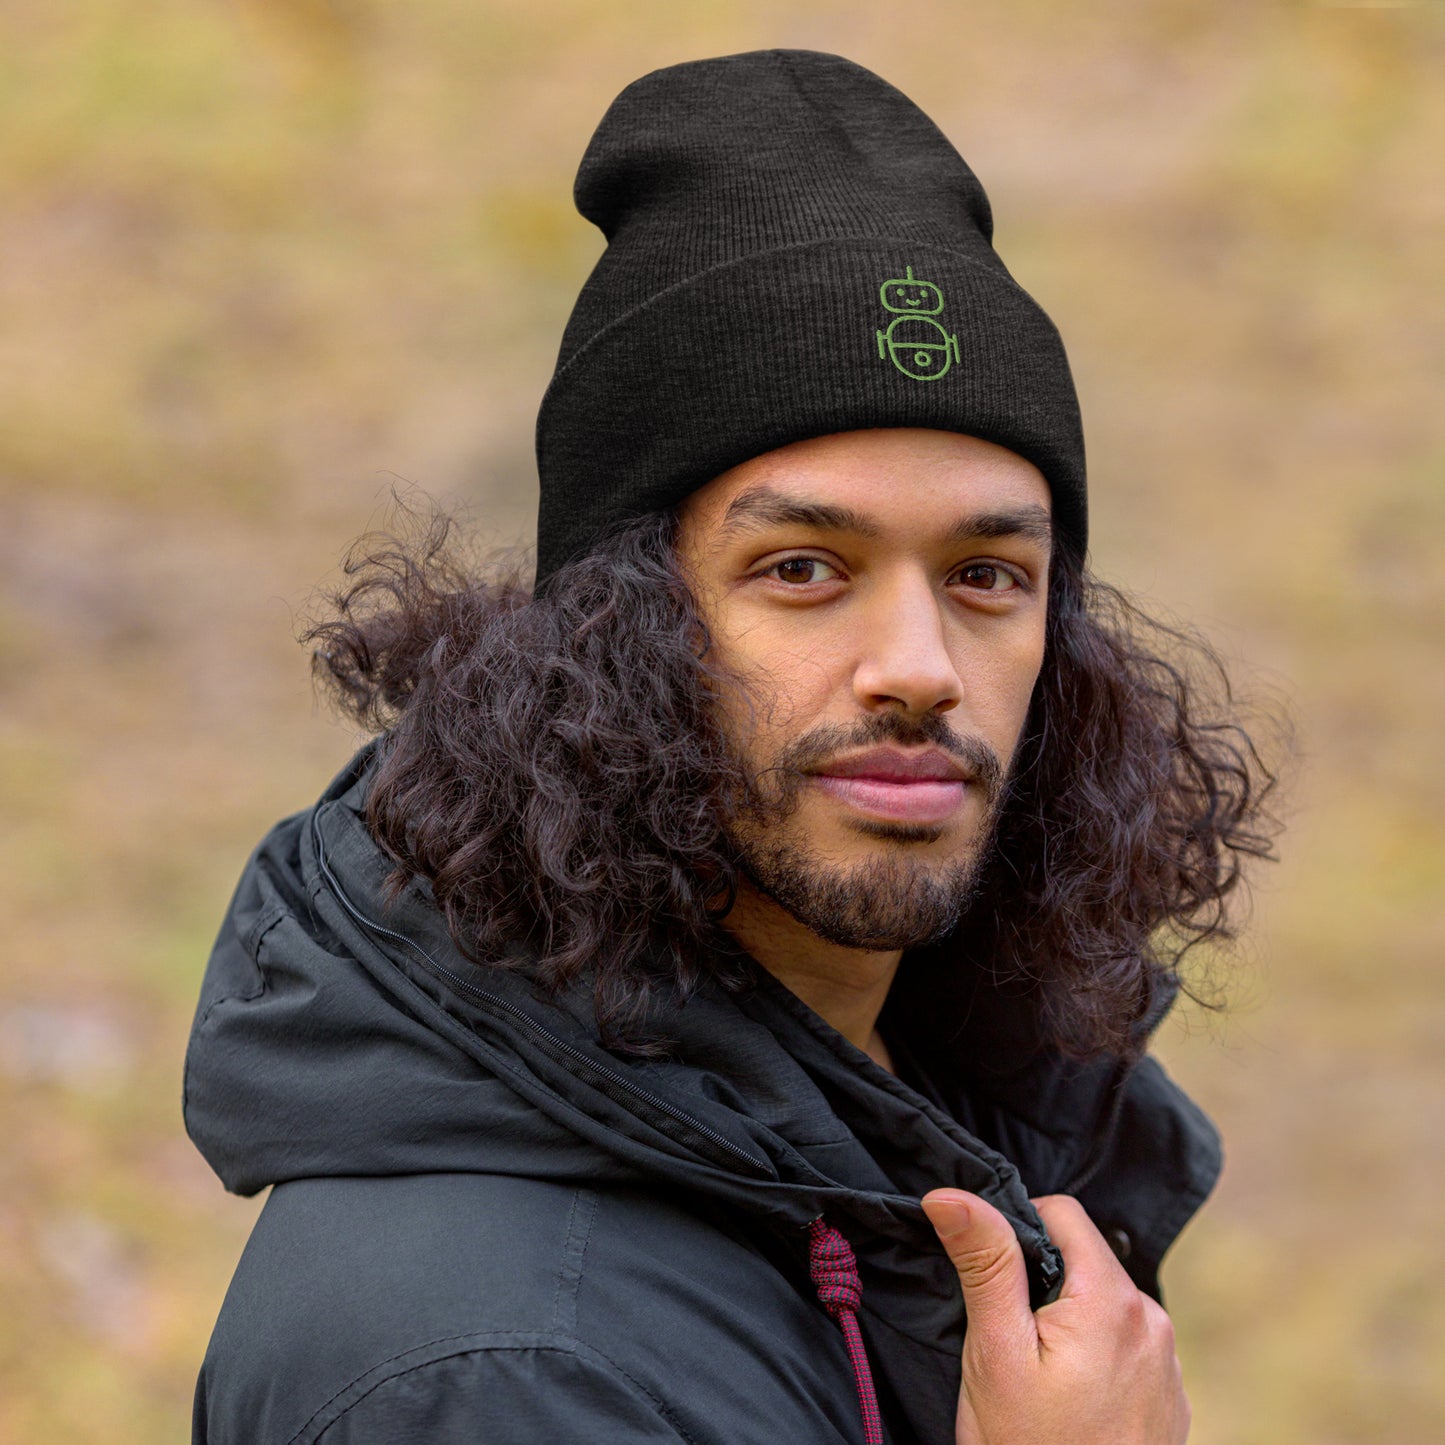 Men with dark grey beanie and Android logo in green